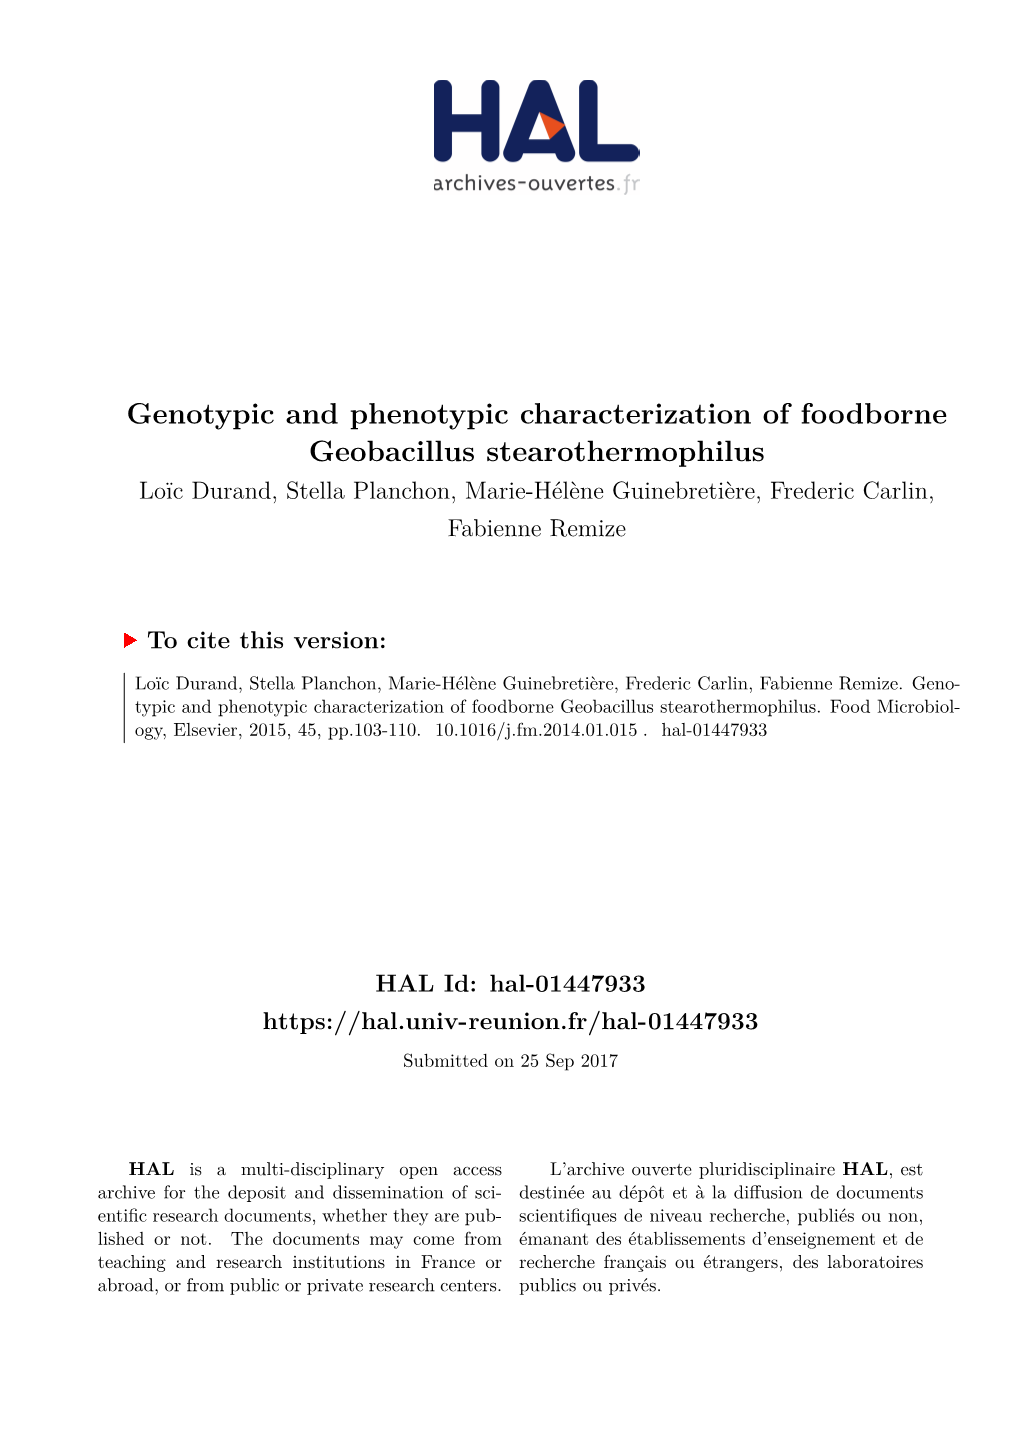 Genotypic and Phenotypic Characterization of Foodborne